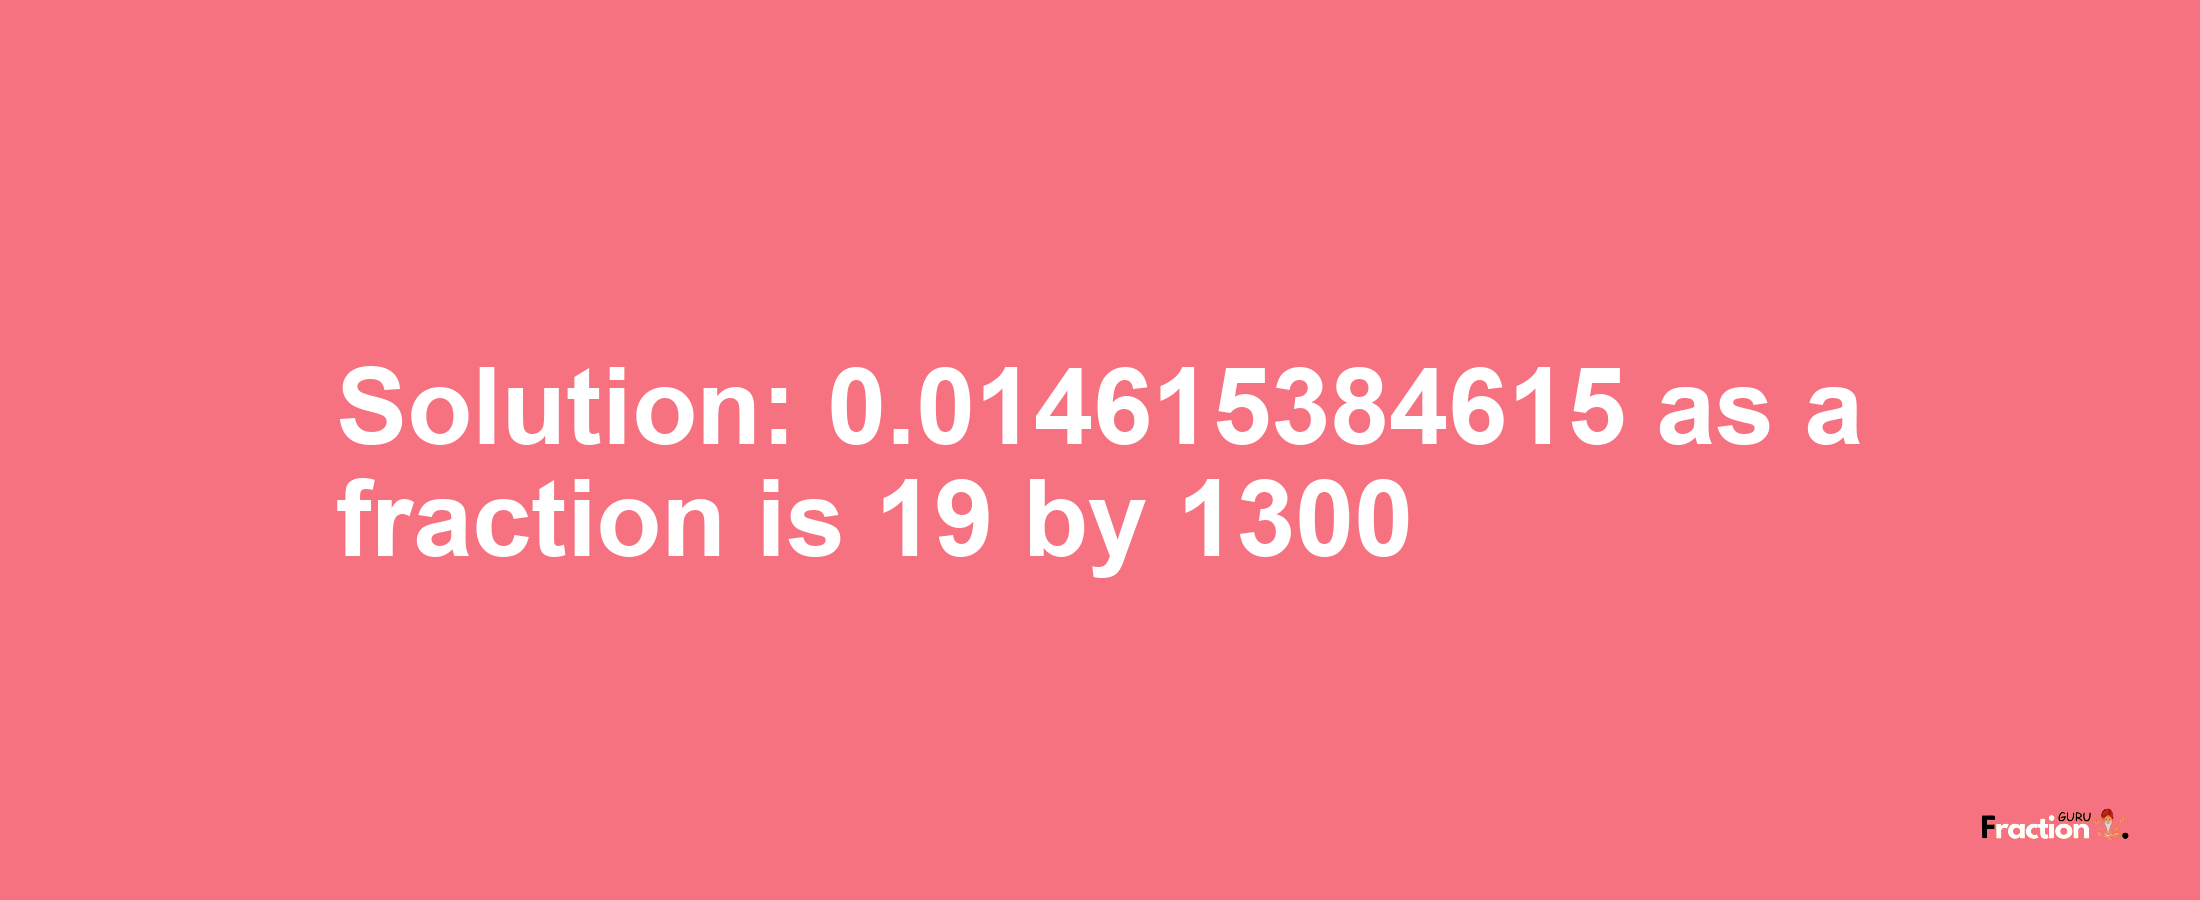 Solution:0.014615384615 as a fraction is 19/1300